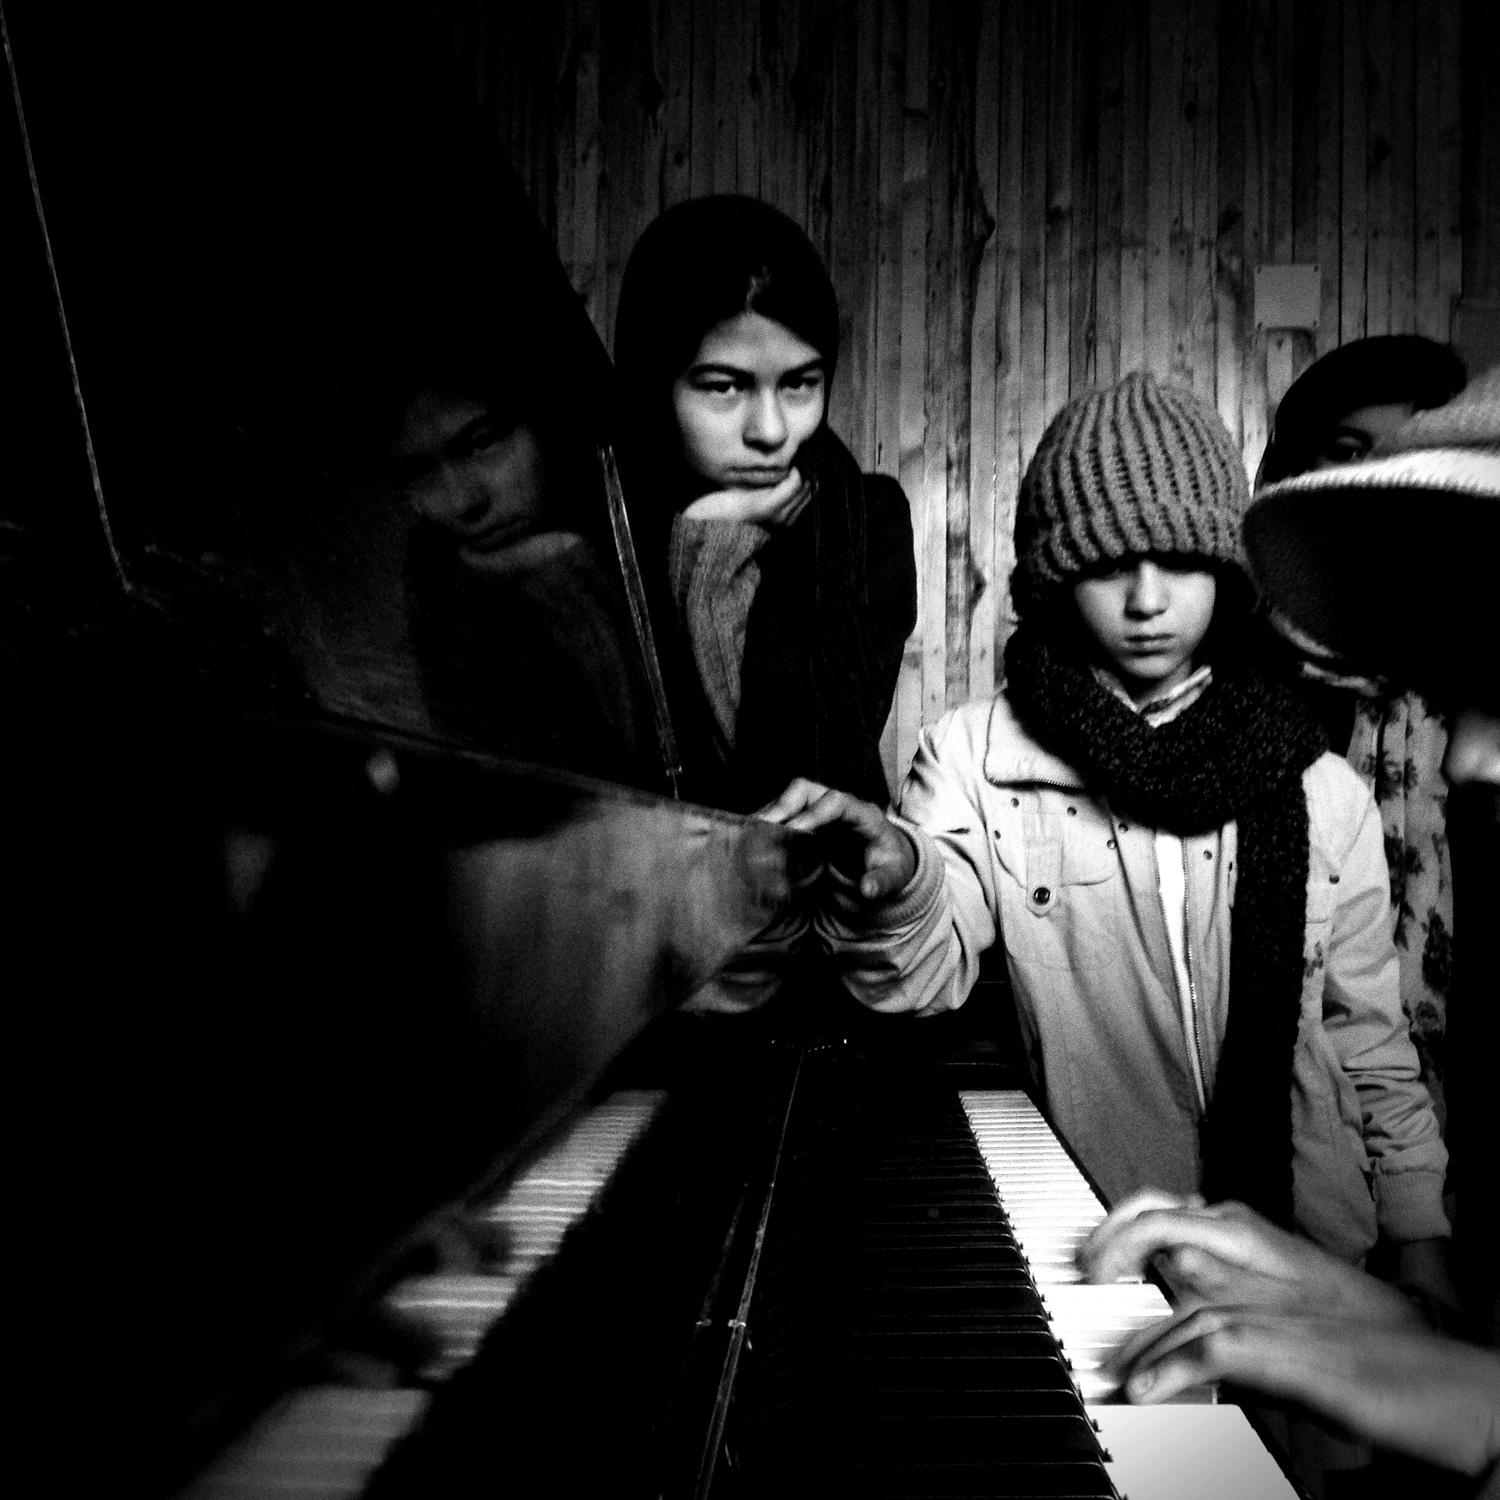 #Girls on #piano in #Afghanistan. Not dissimilar to throwing a shoe at a #president in the #US.12/22/2013